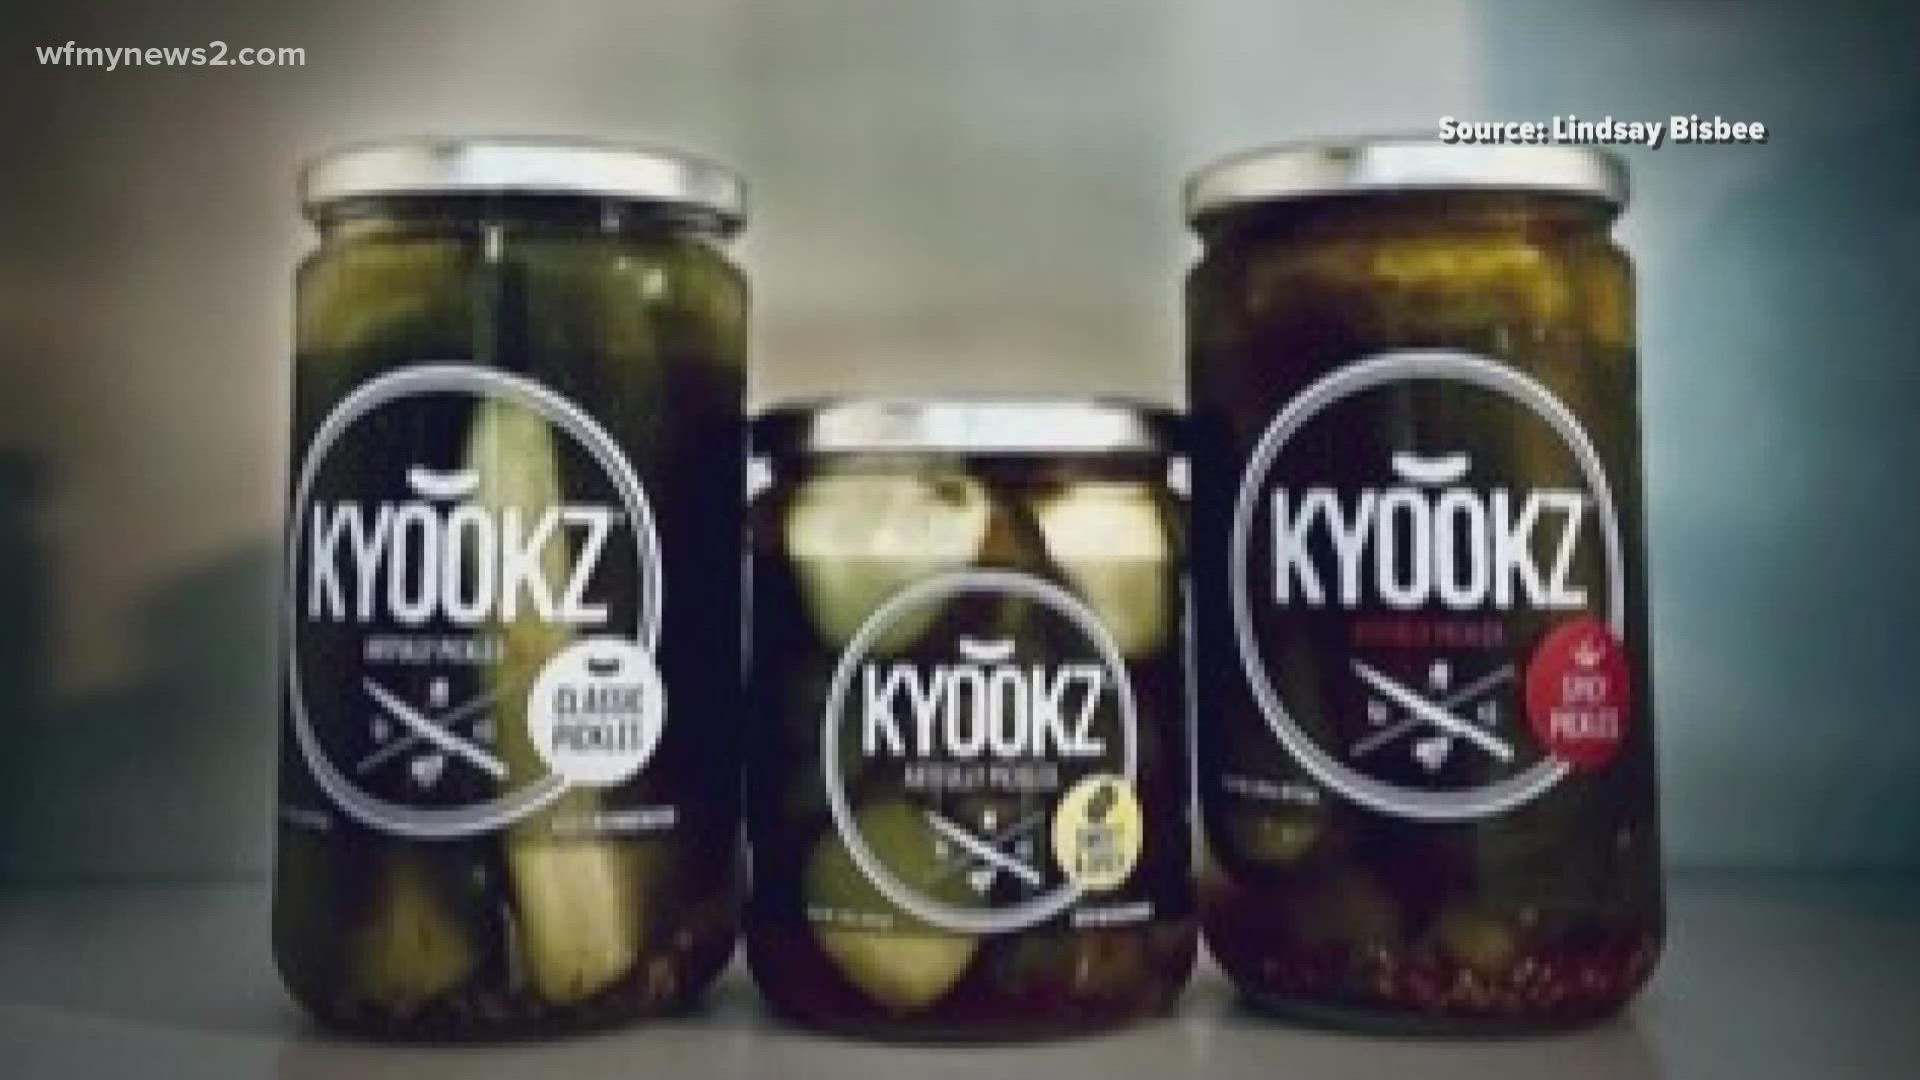 Kyooks Pickles owner, Lindsay Bisbee, said her first job helped her come up with her unique pickle-making process.